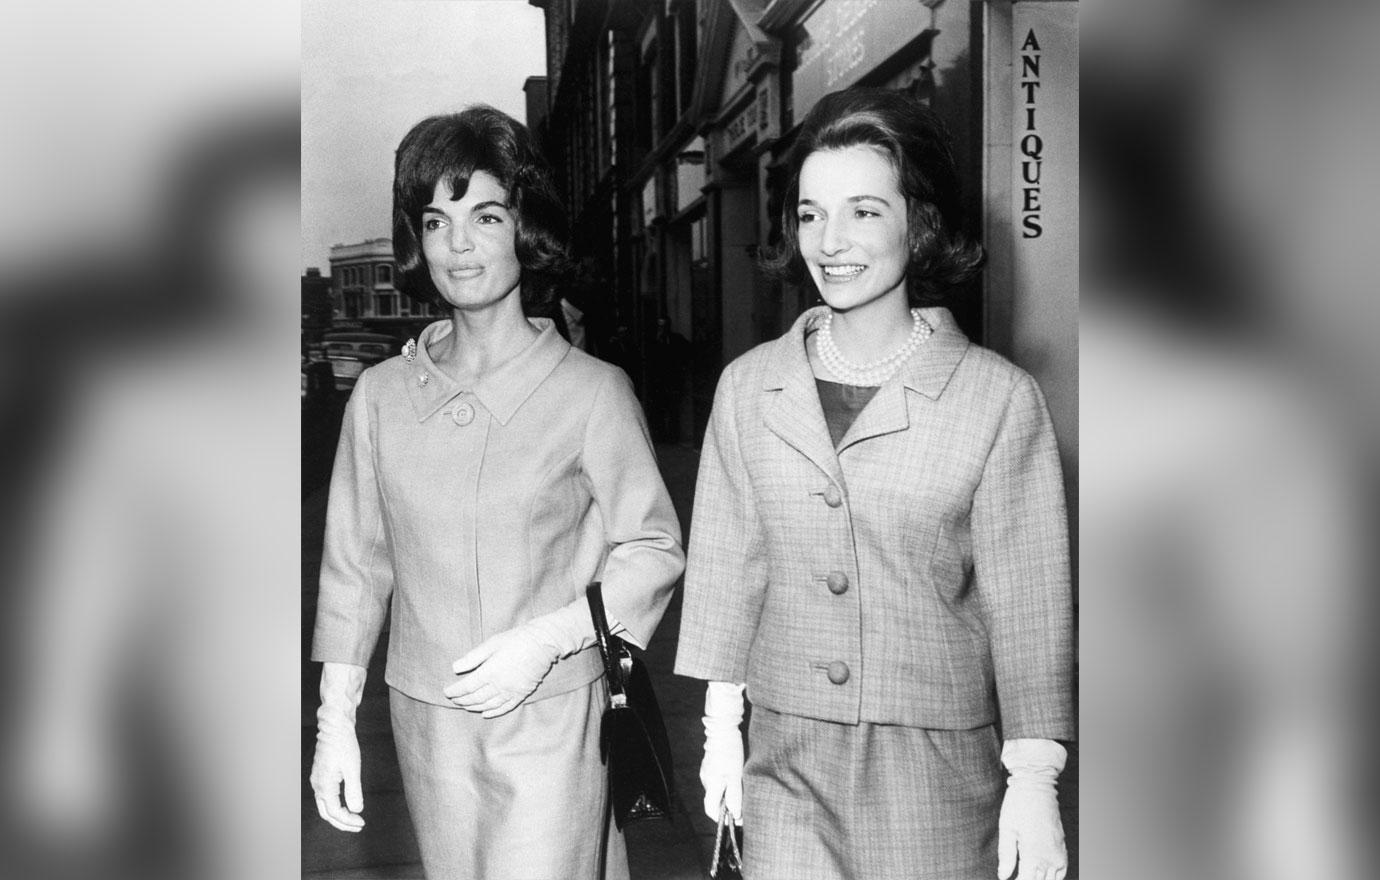 Lee Radziwill & Sister Jacqueline Kennedy Onassis Feuded Over Men & Money